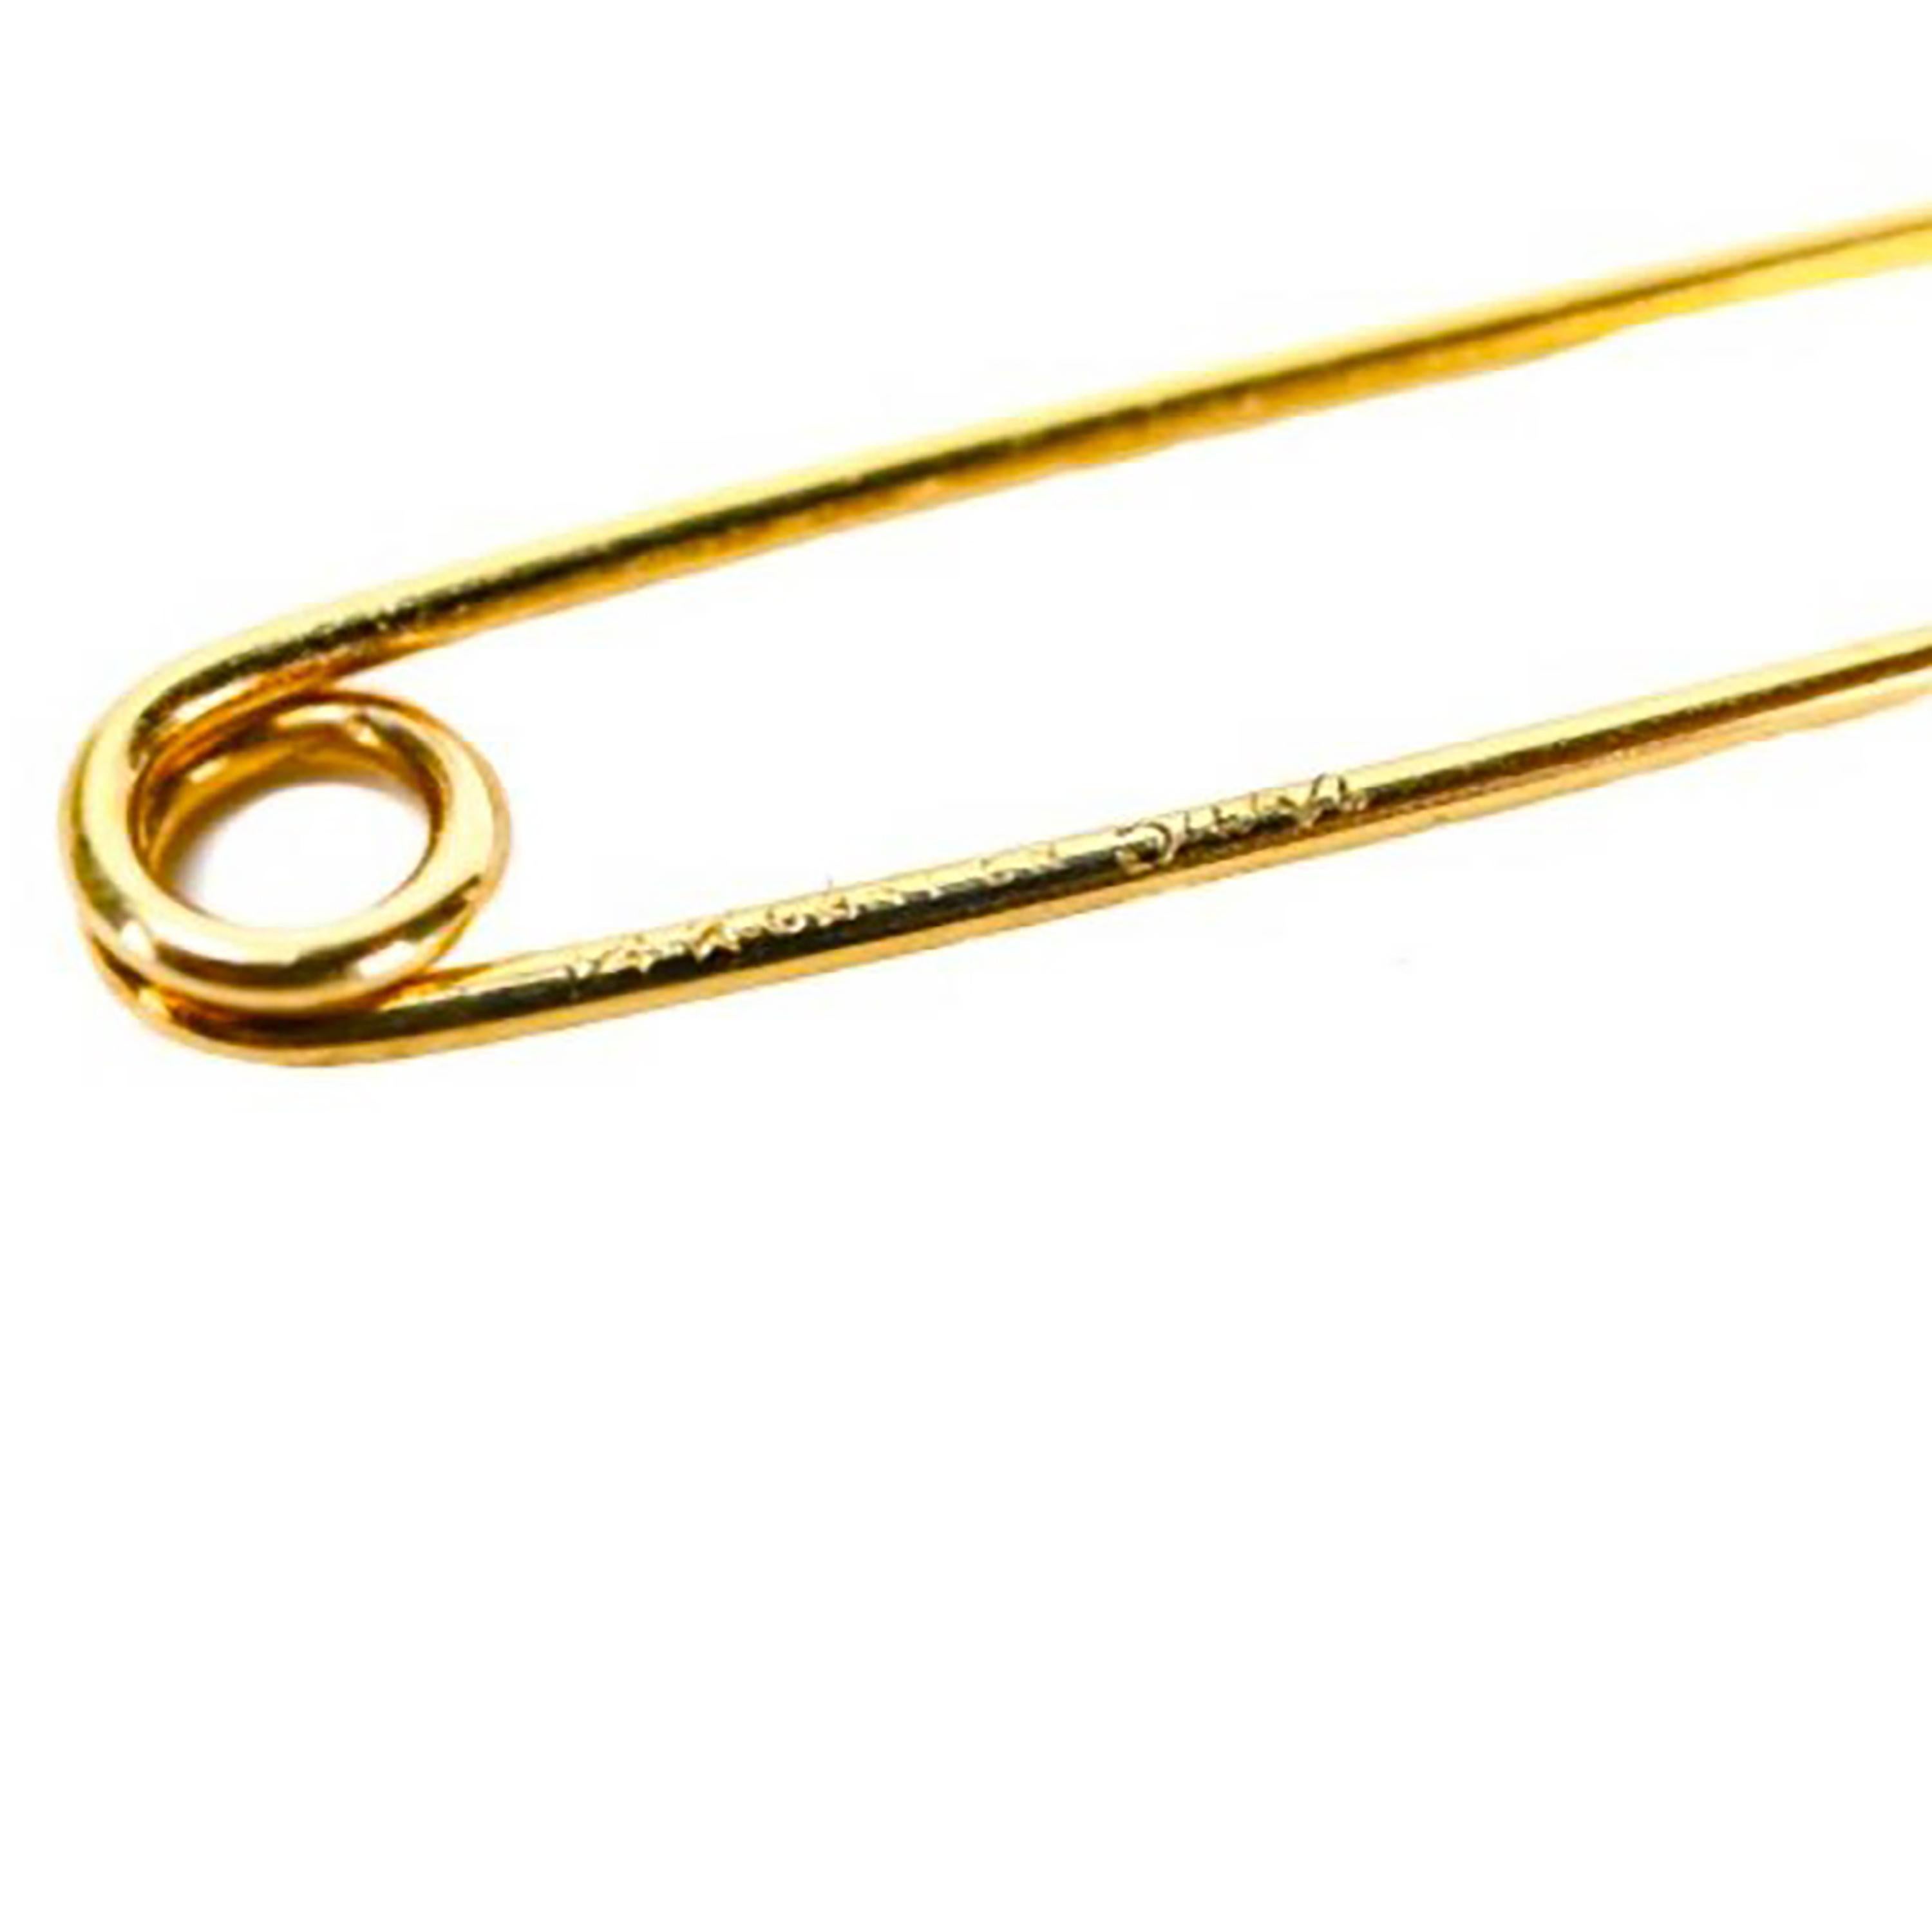 Contemporary Cartier Vintage 14 Karat Yellow Gold 1.75 Inch Flexible Opening Safety Pin